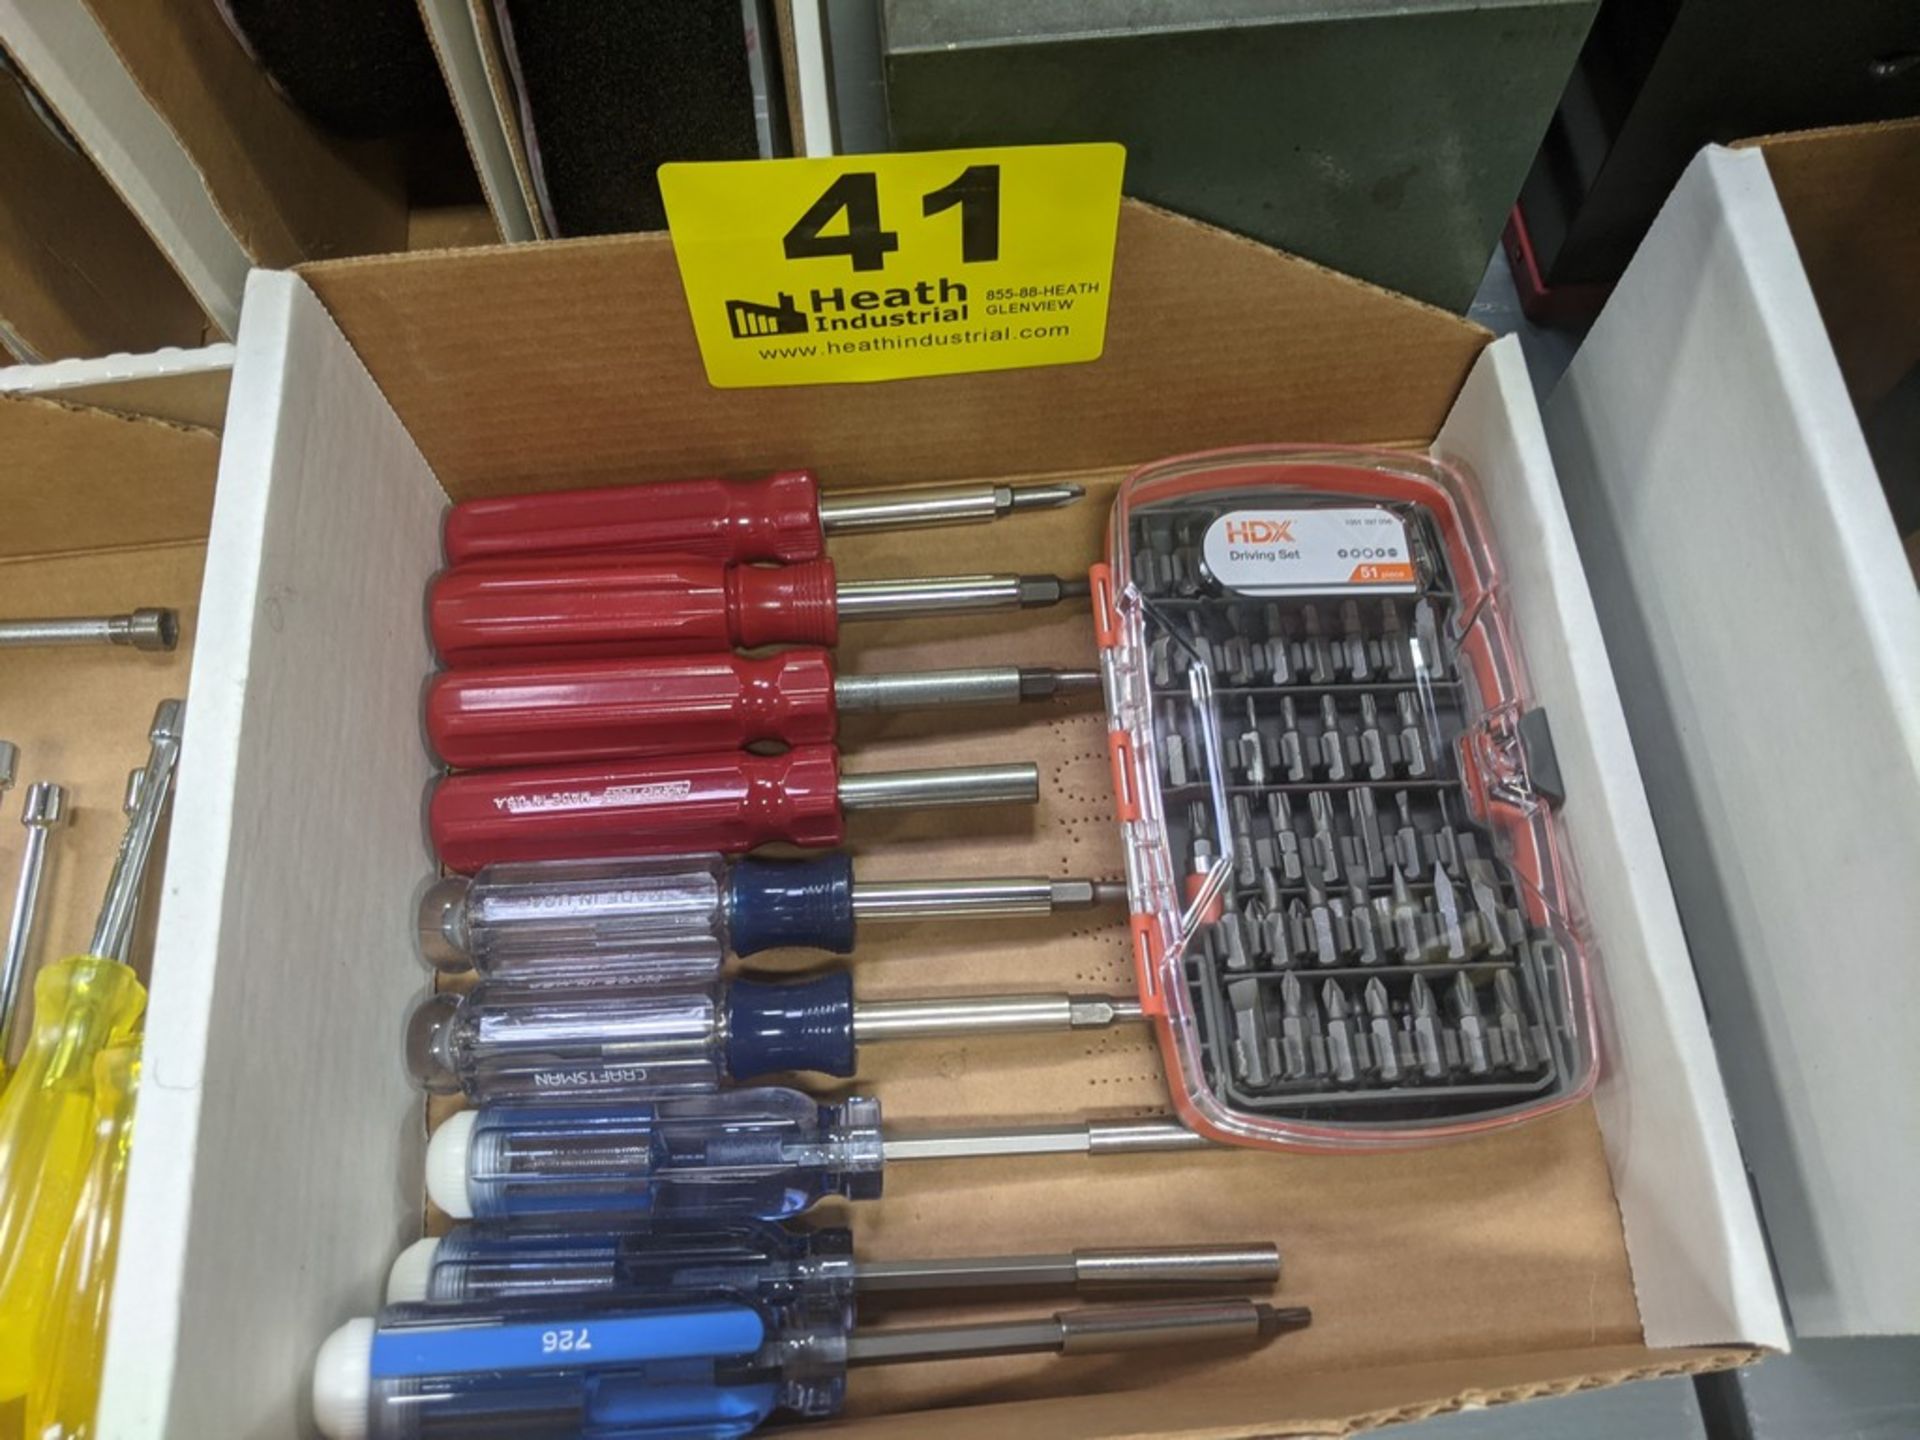 (9) SCREWDRIVERS WITH HDX DRIVING SET